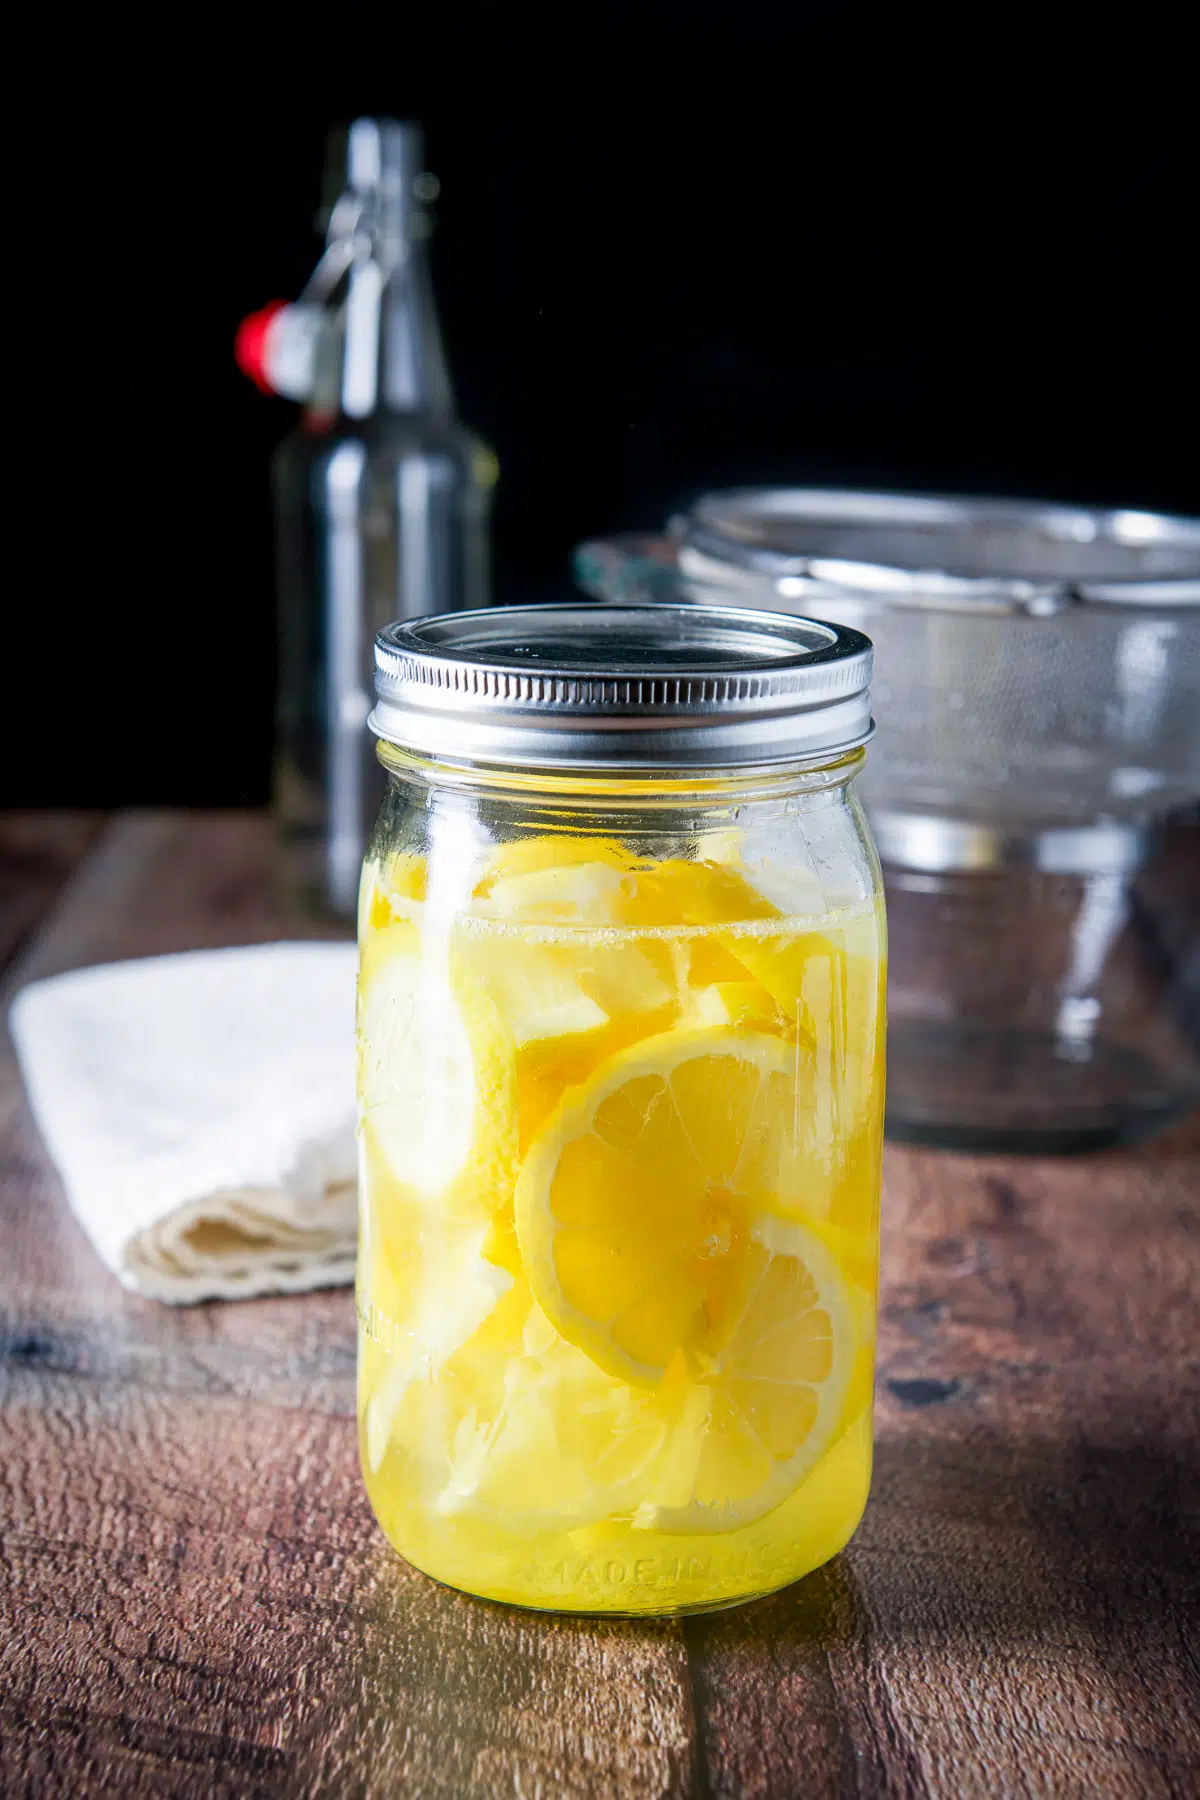 Jar with the lemons in the vodka with a sieve in the back